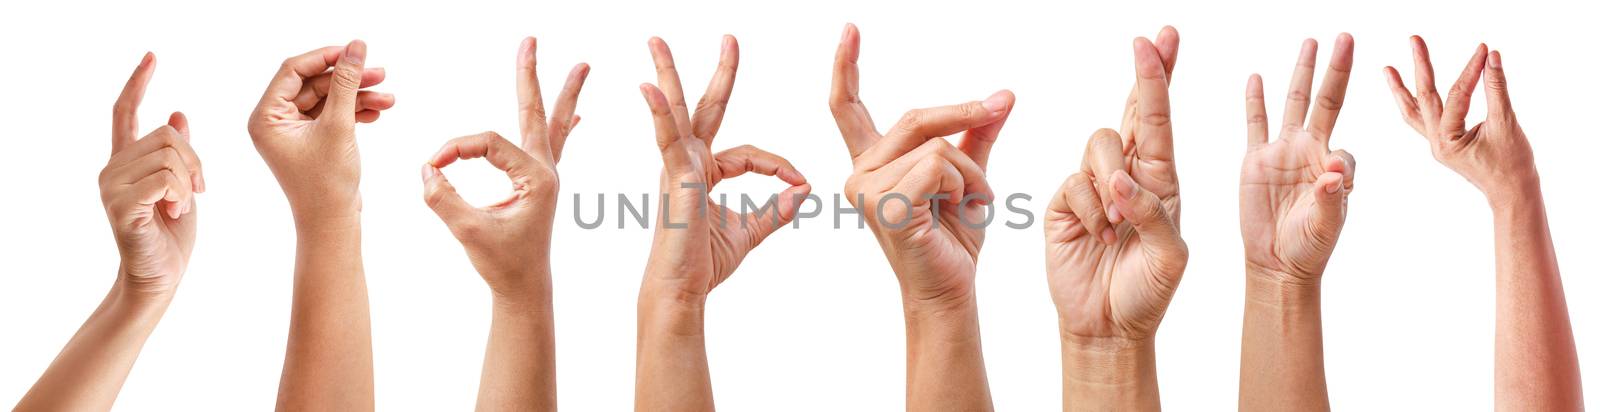 Collage with female hands showing different gestures on white background, isolated